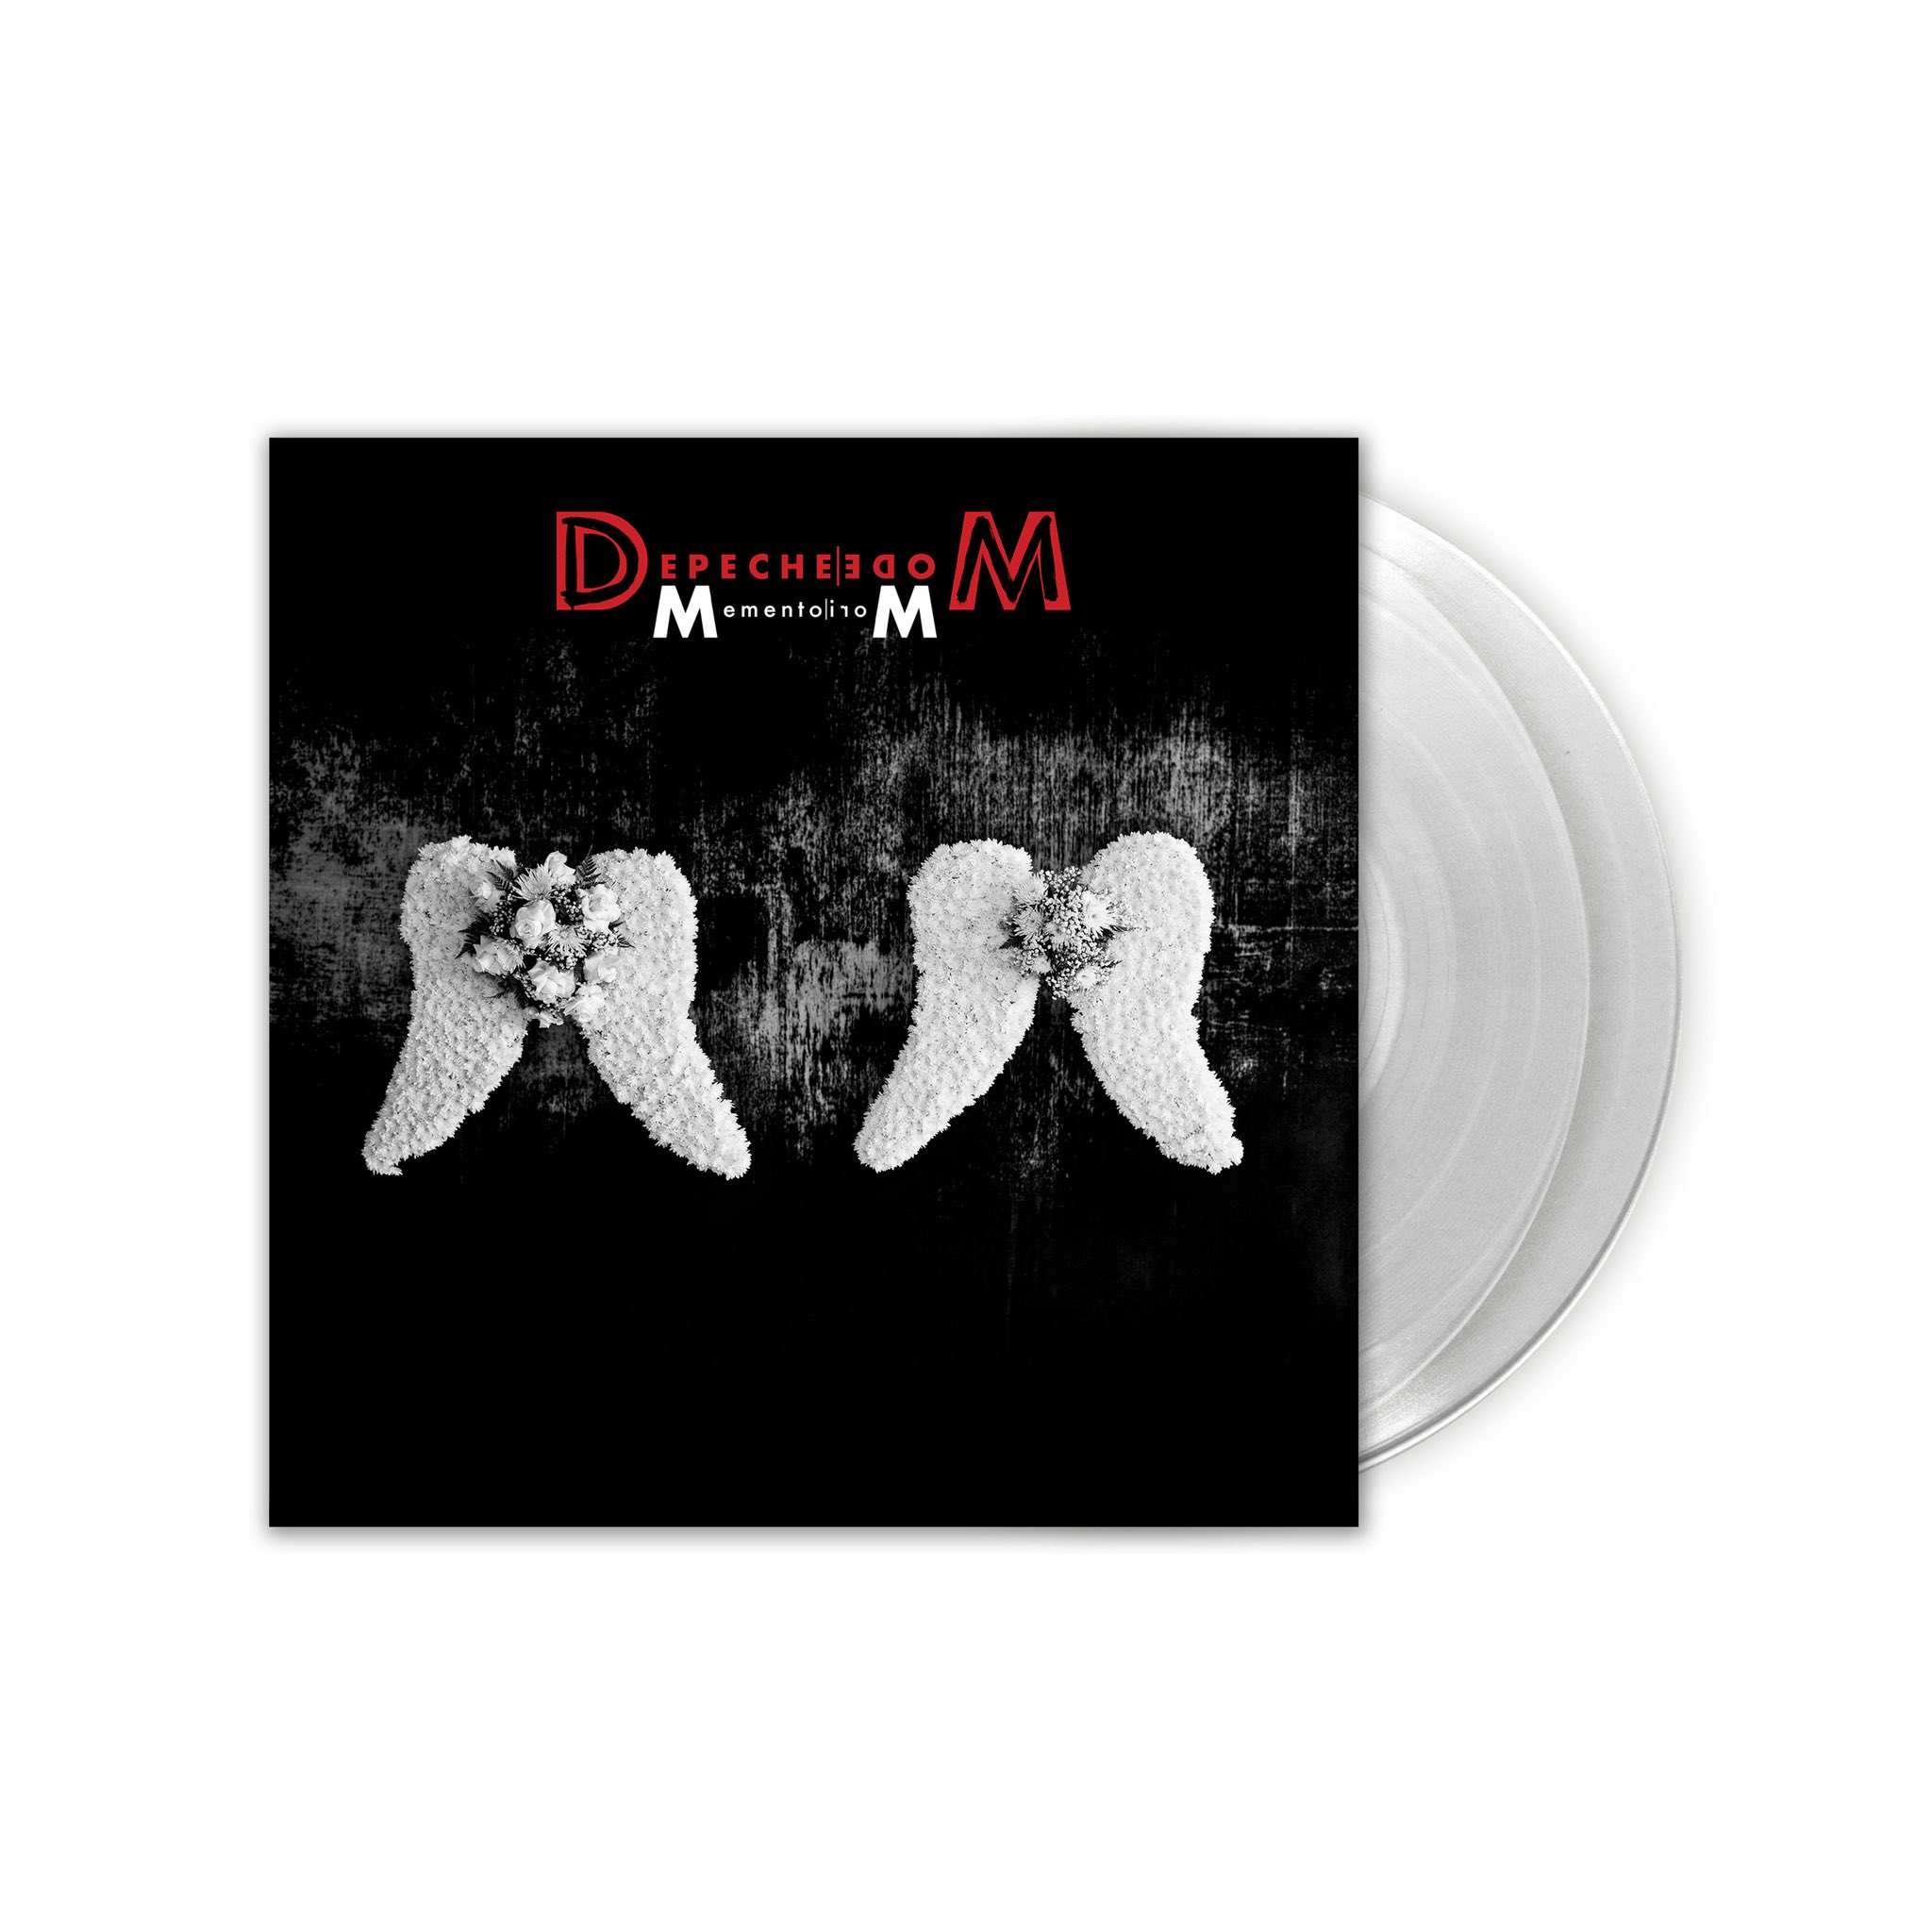 Depeche Mode on X: Pre-order the  exclusive crystal clear colored  vinyl of Depeche Mode's new album Memento Mori here.    / X